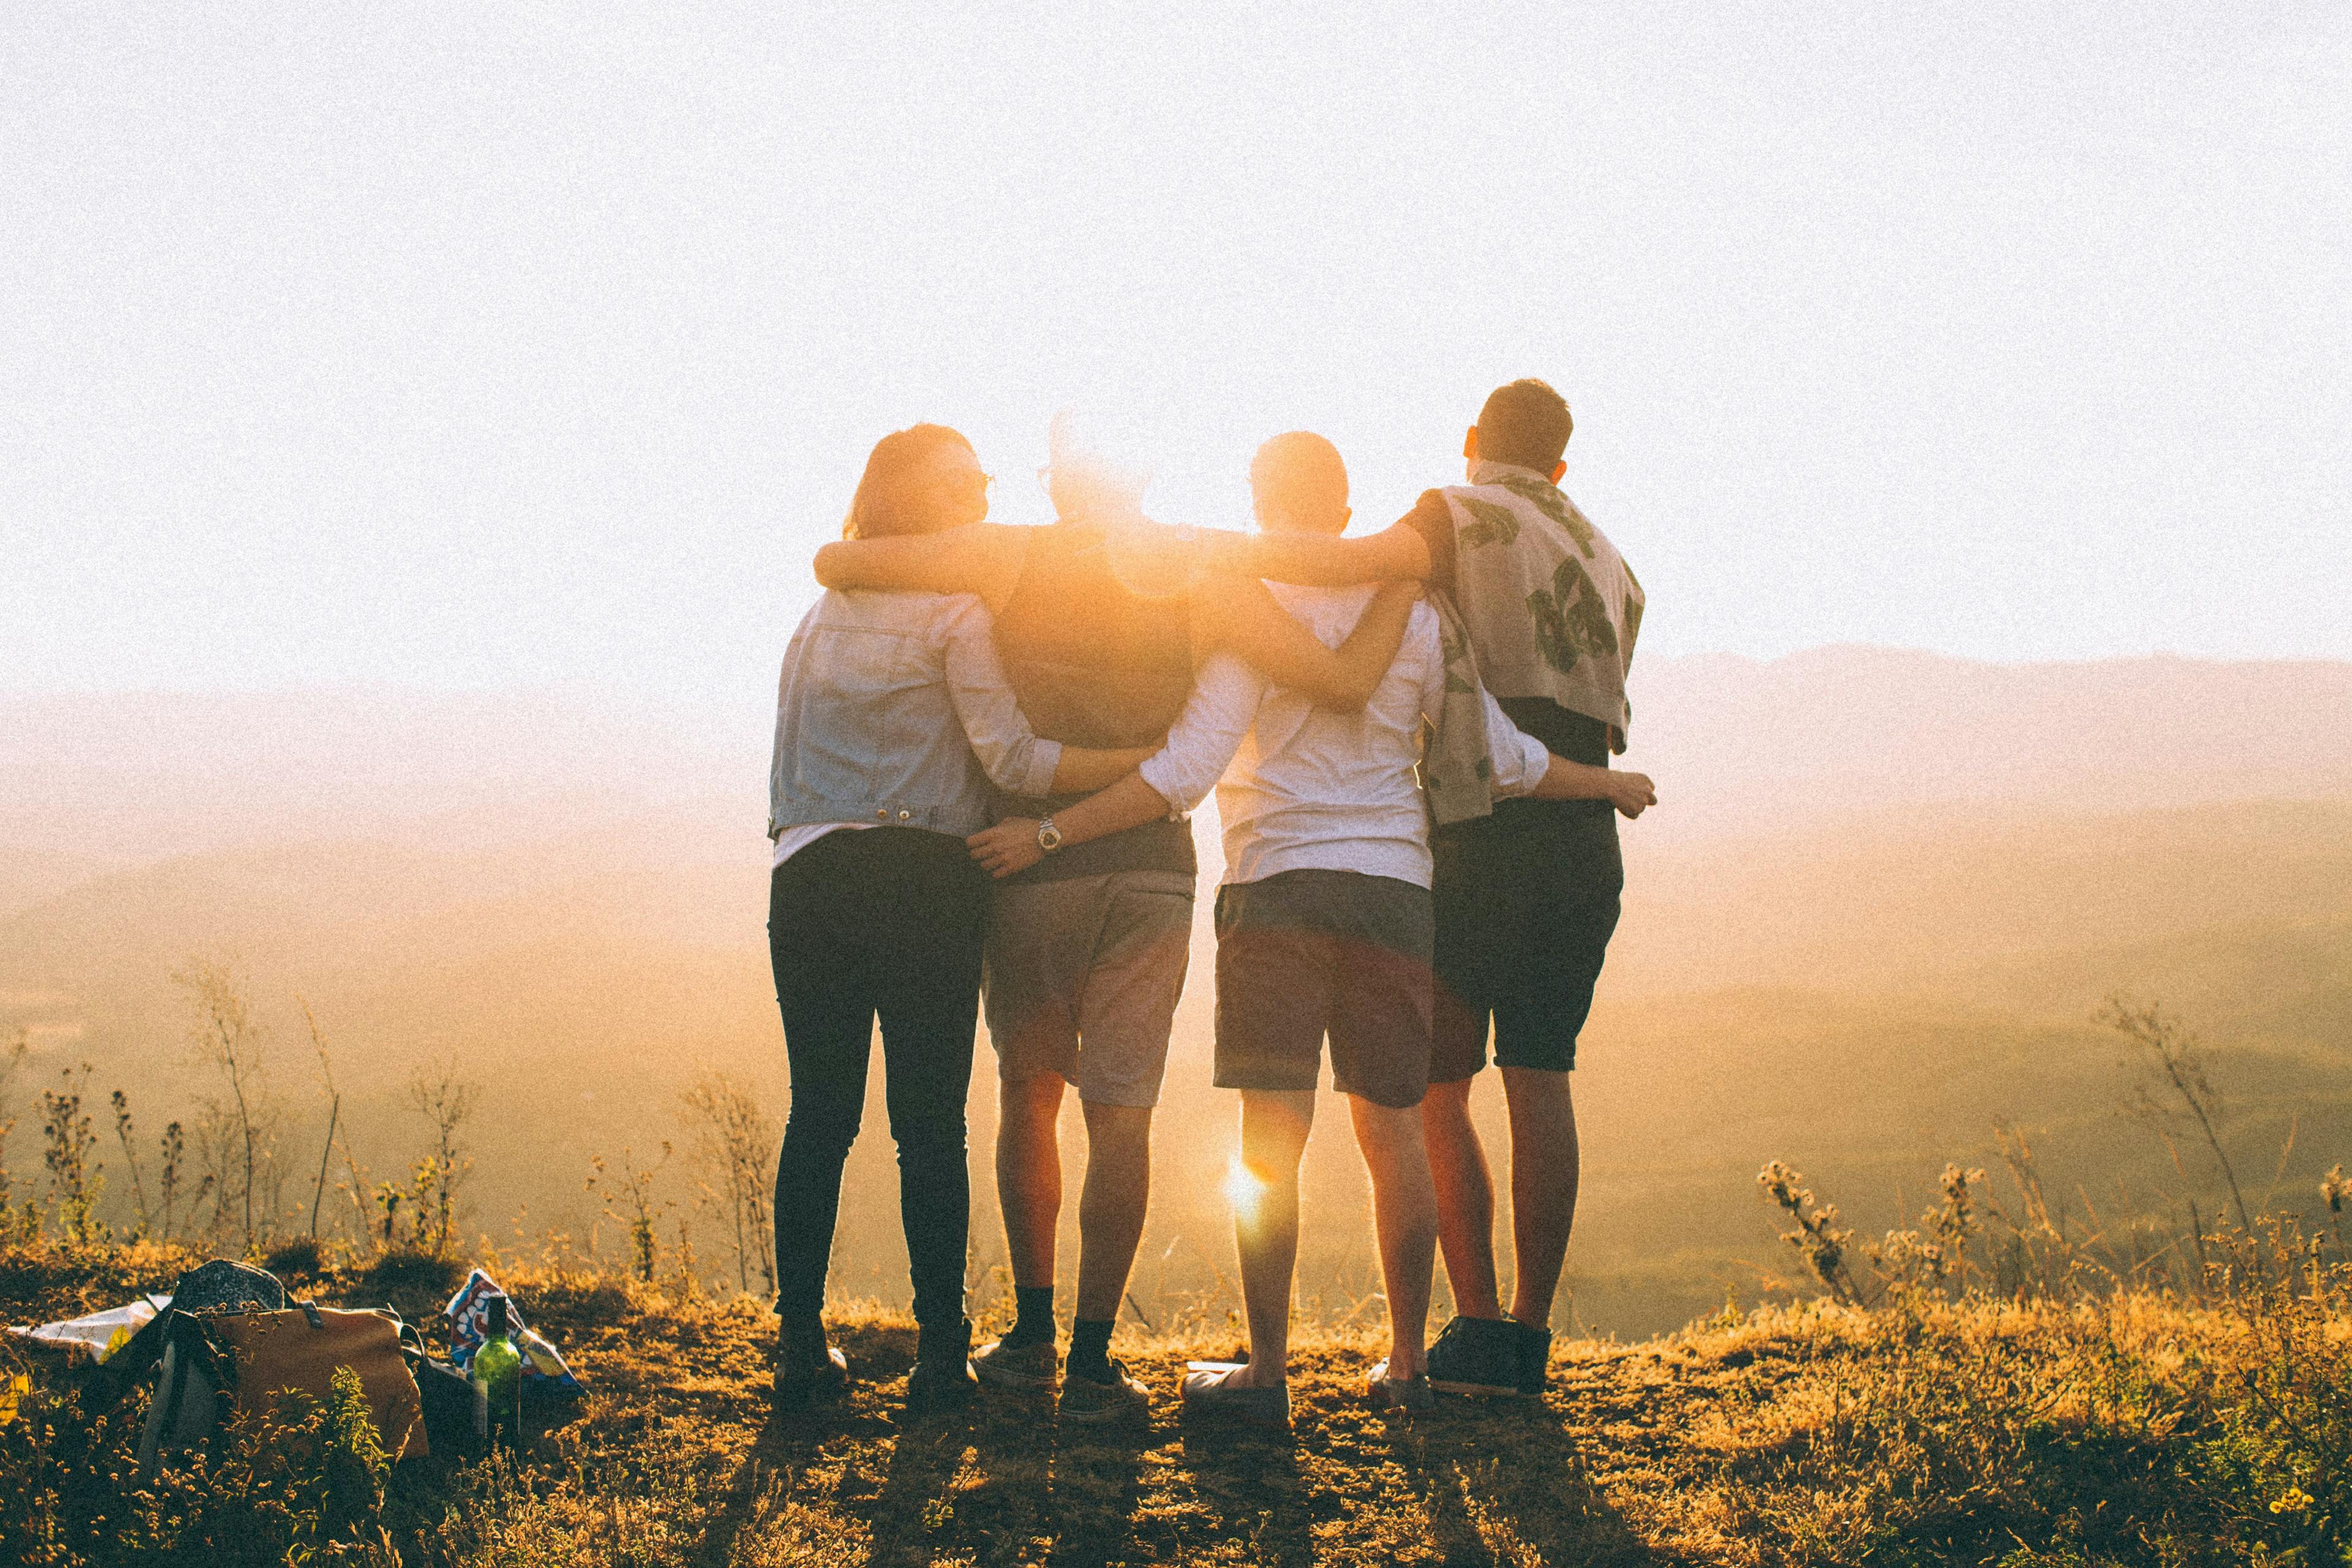 Group of friends looking into sunset